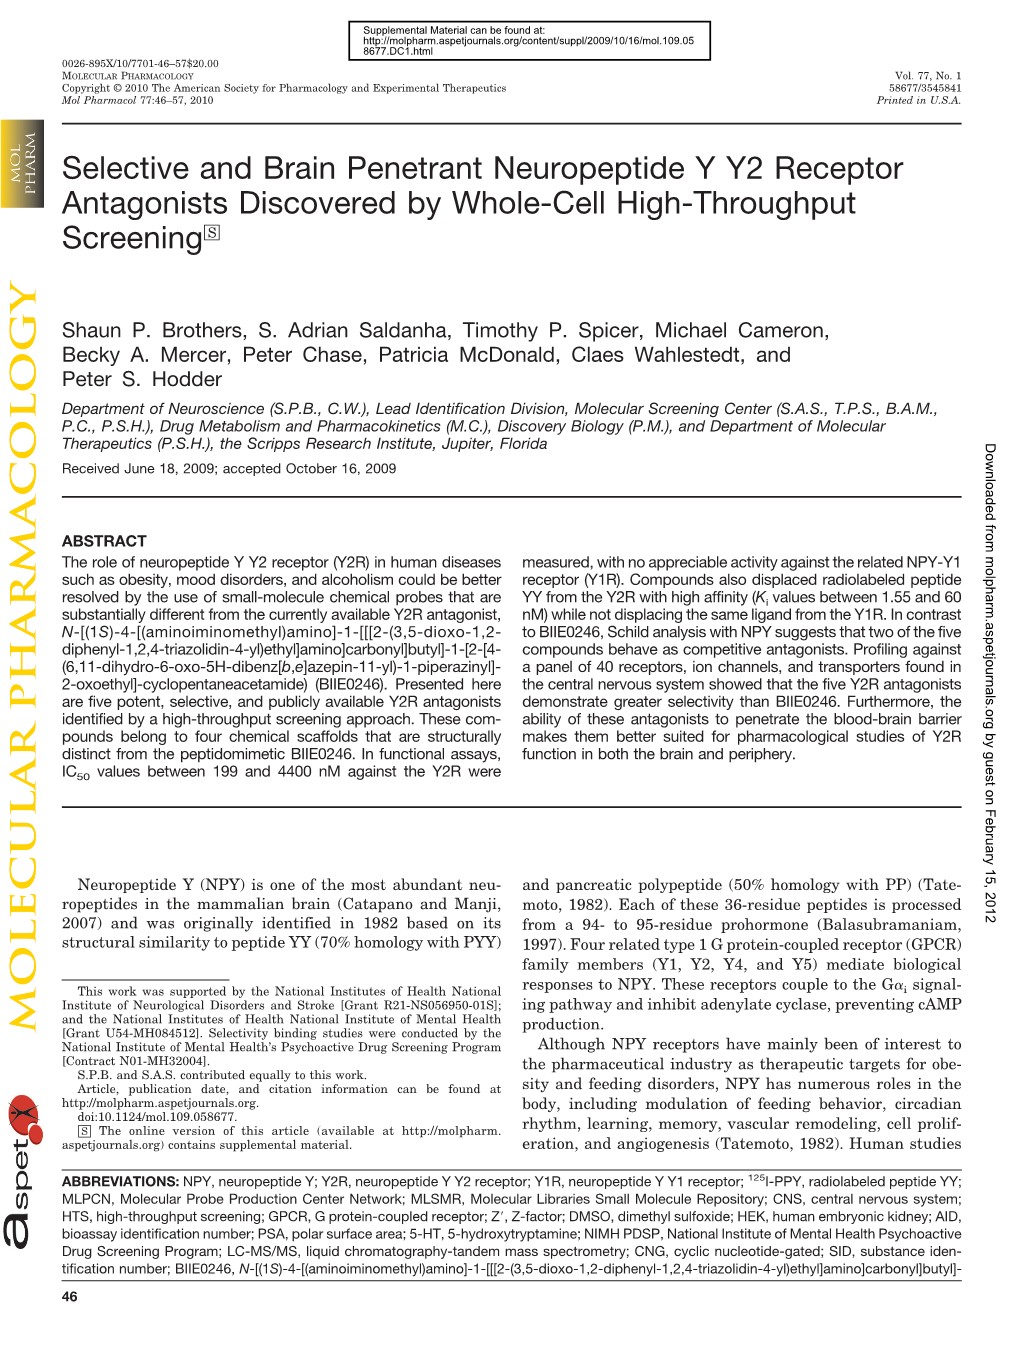 Selective and Brain Penetrant Neuropeptide Y Y2 Receptor Antagonists Discovered by Whole-Cell High-Throughput Screening□S